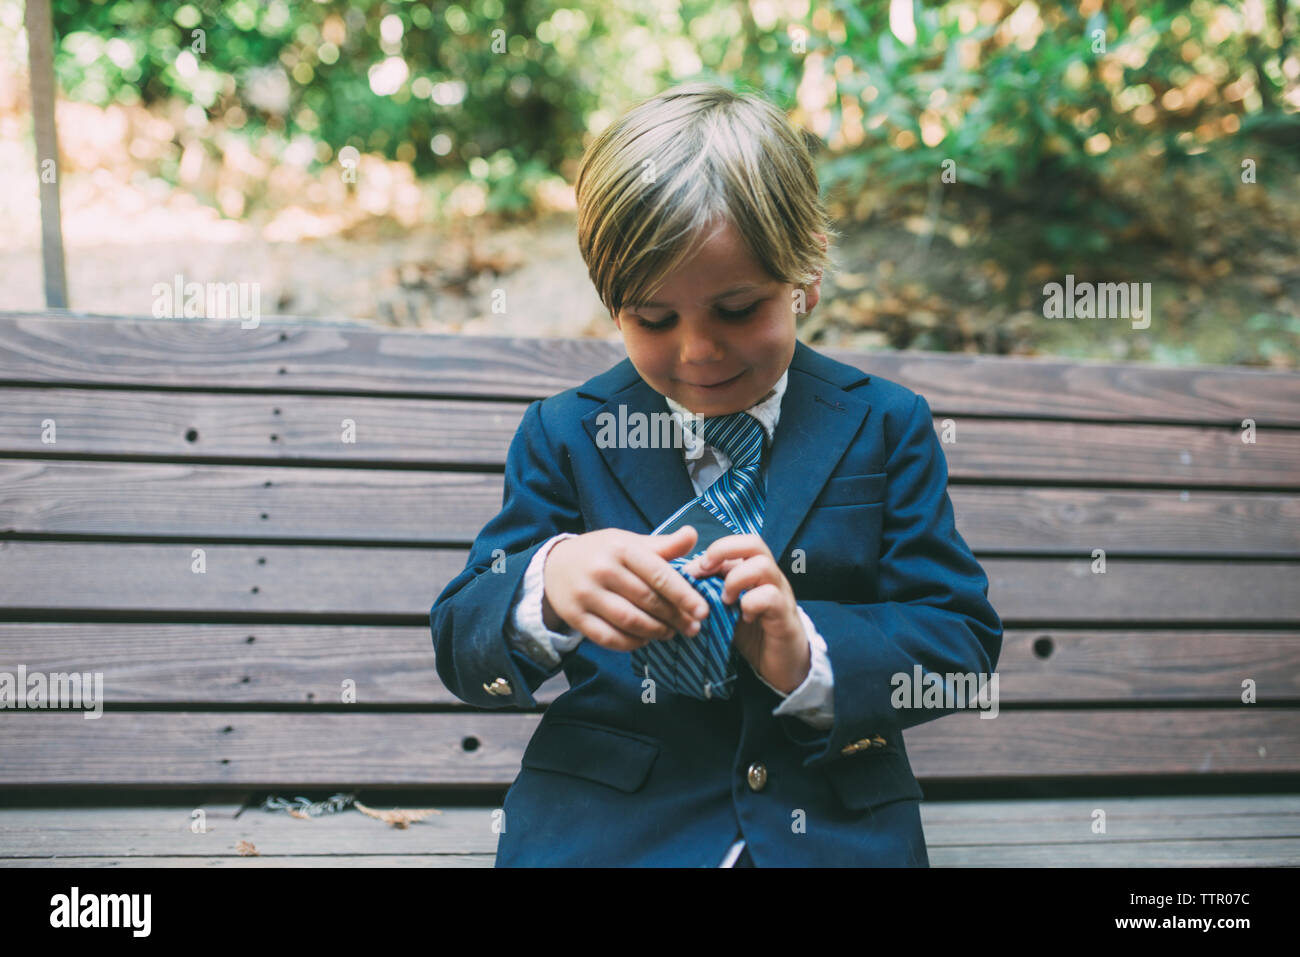 Cute boy in suit adjusting necktie while sitting on bench Banque D'Images